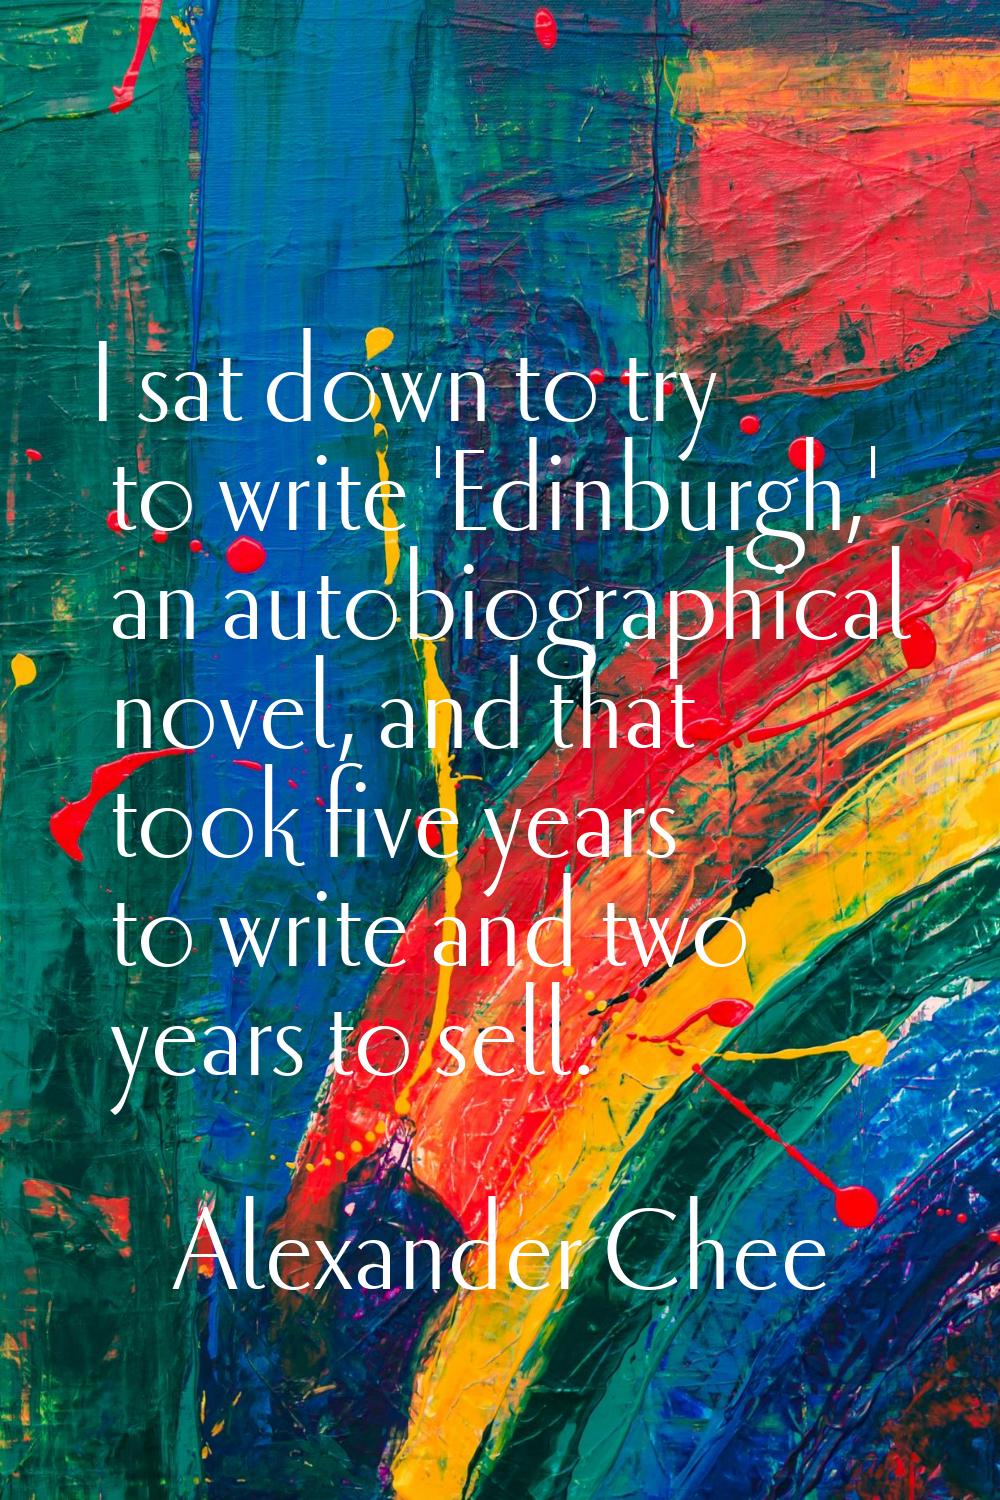 I sat down to try to write 'Edinburgh,' an autobiographical novel, and that took five years to writ